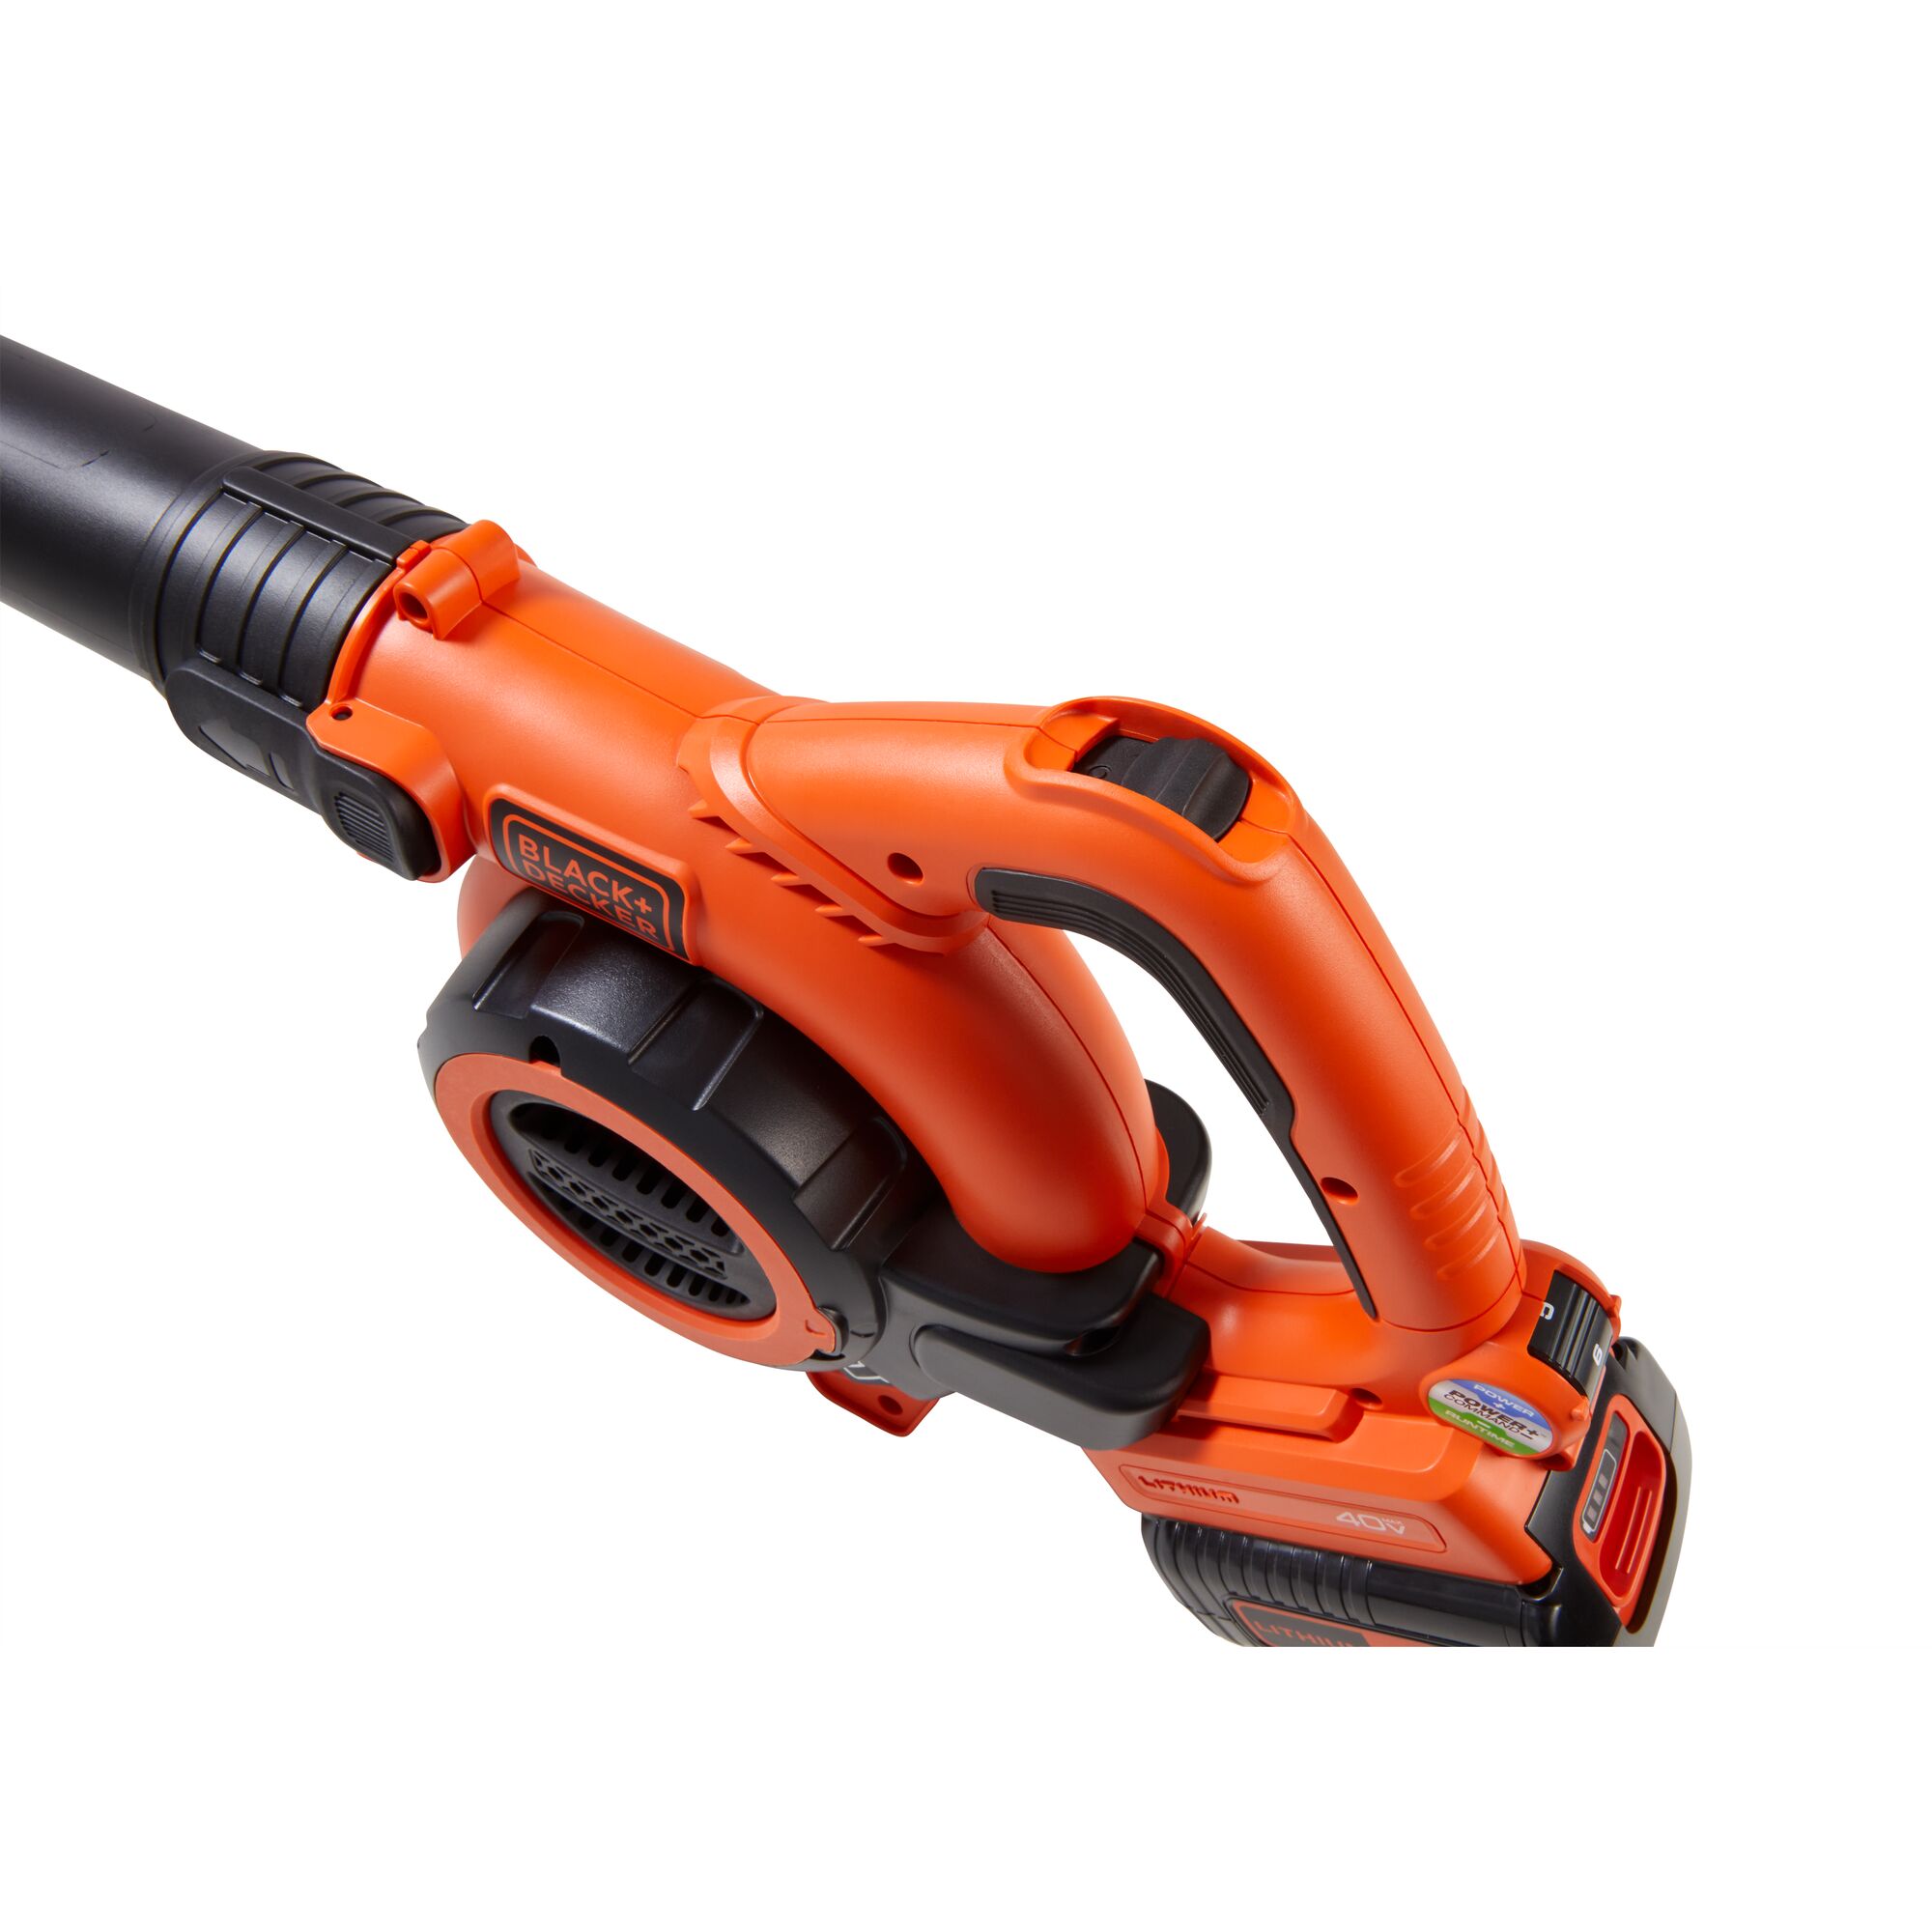 Close-up of Cordless Leaf Blower/Vacuum body on white background.